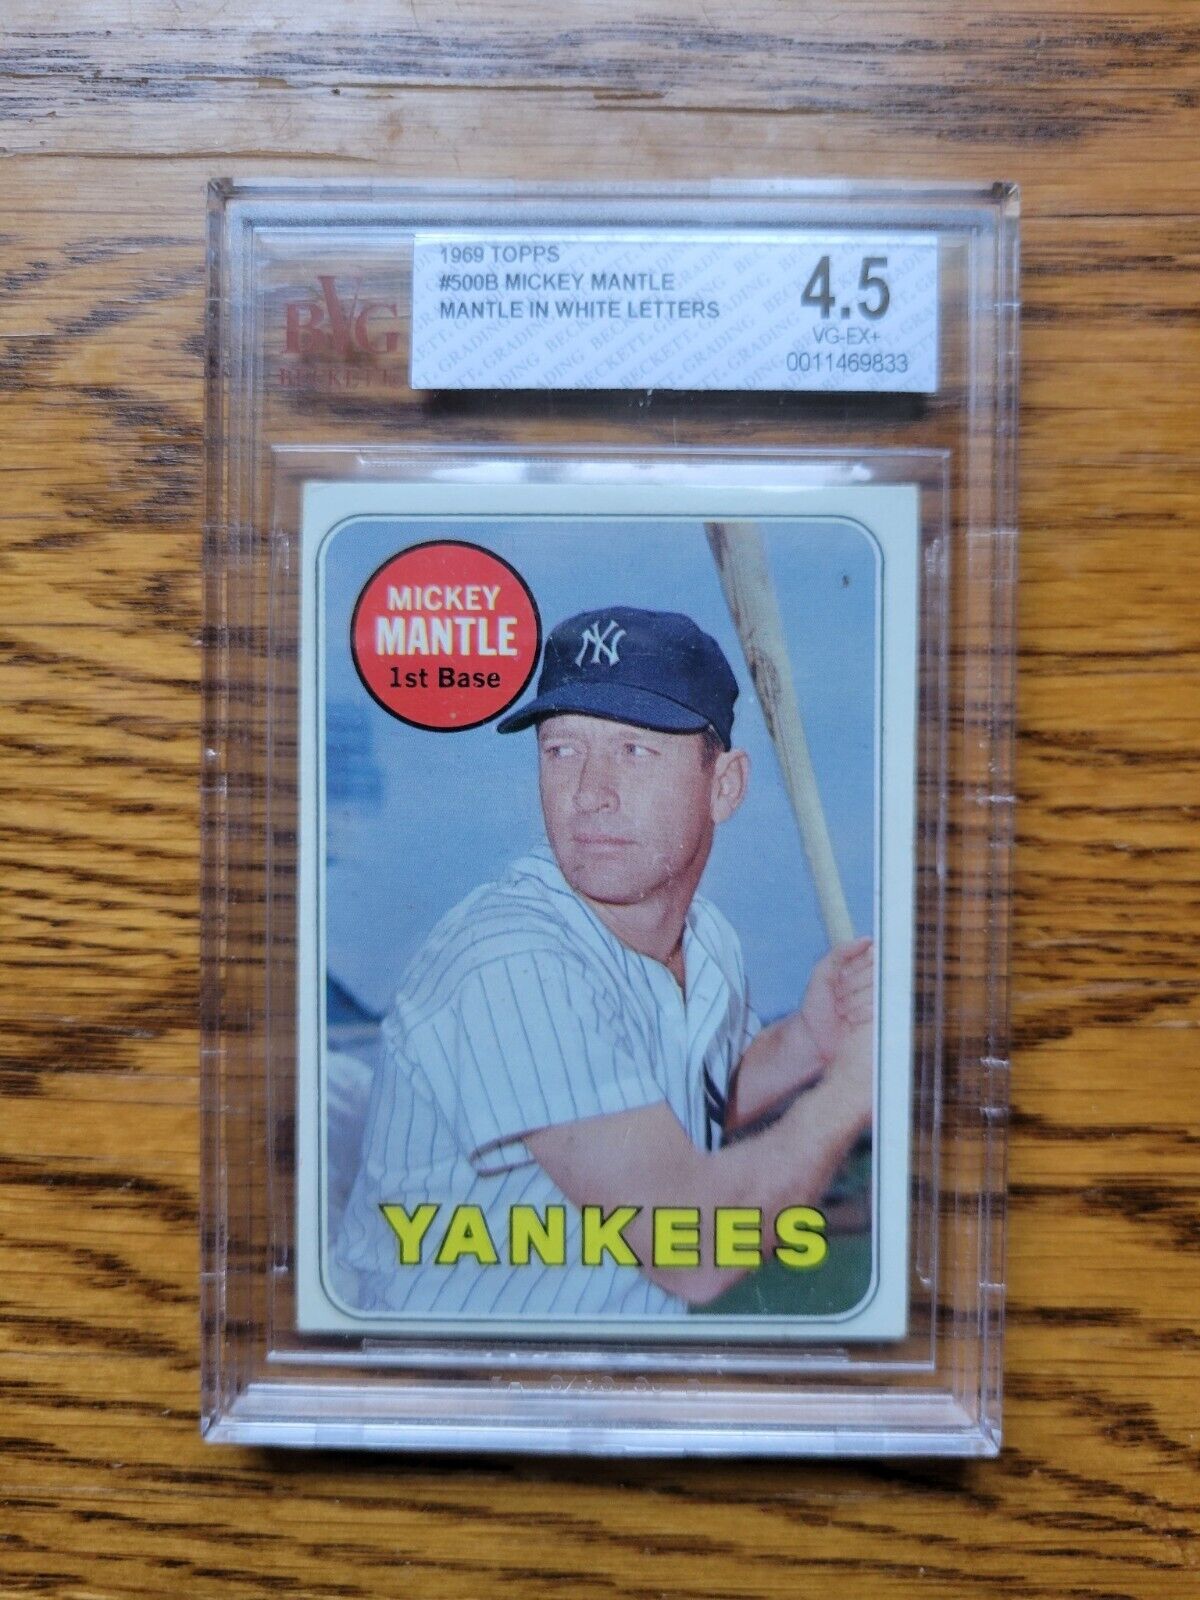 1969 Topps Mickey Mantle Yankees Card #500 HOF. BVG 4.5 - Rare White Letters 